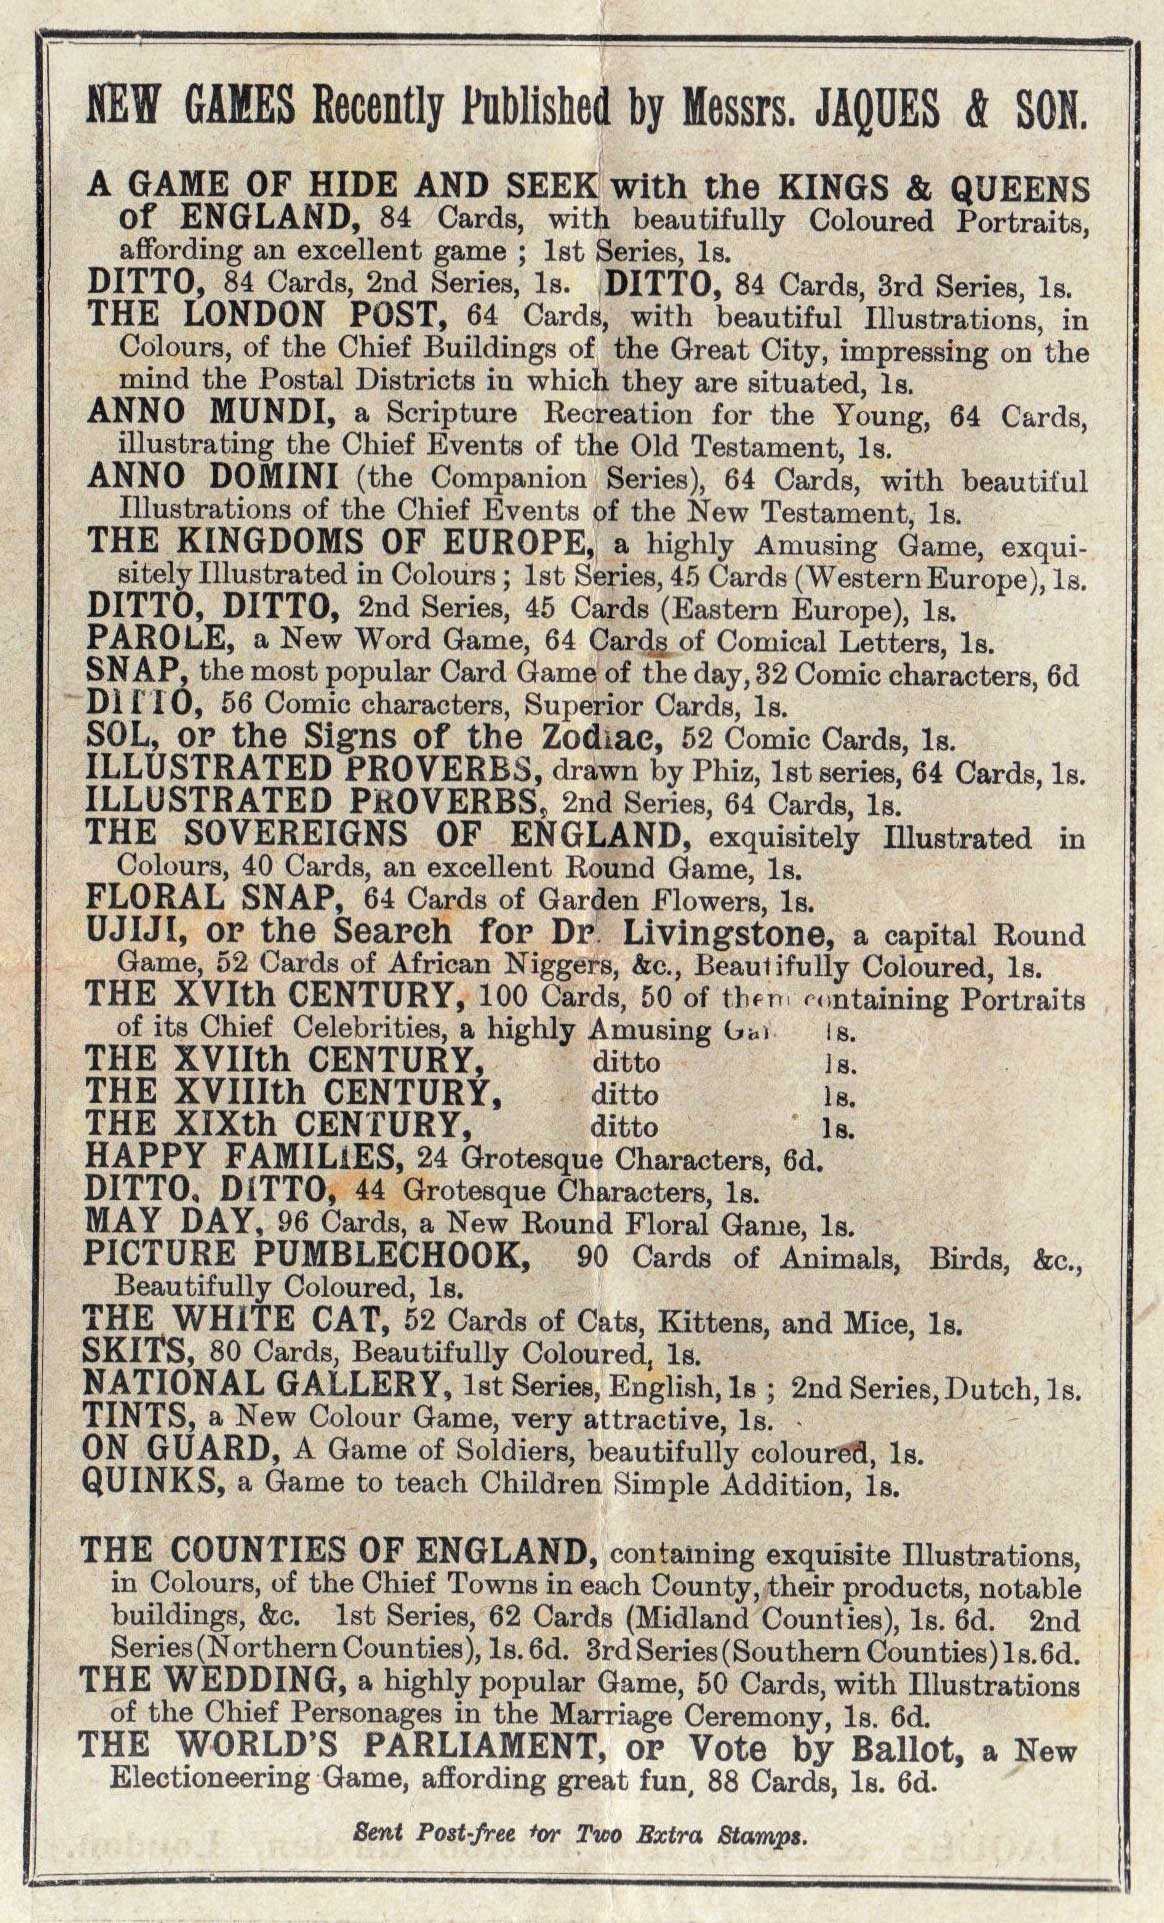 list of new games, c.1895